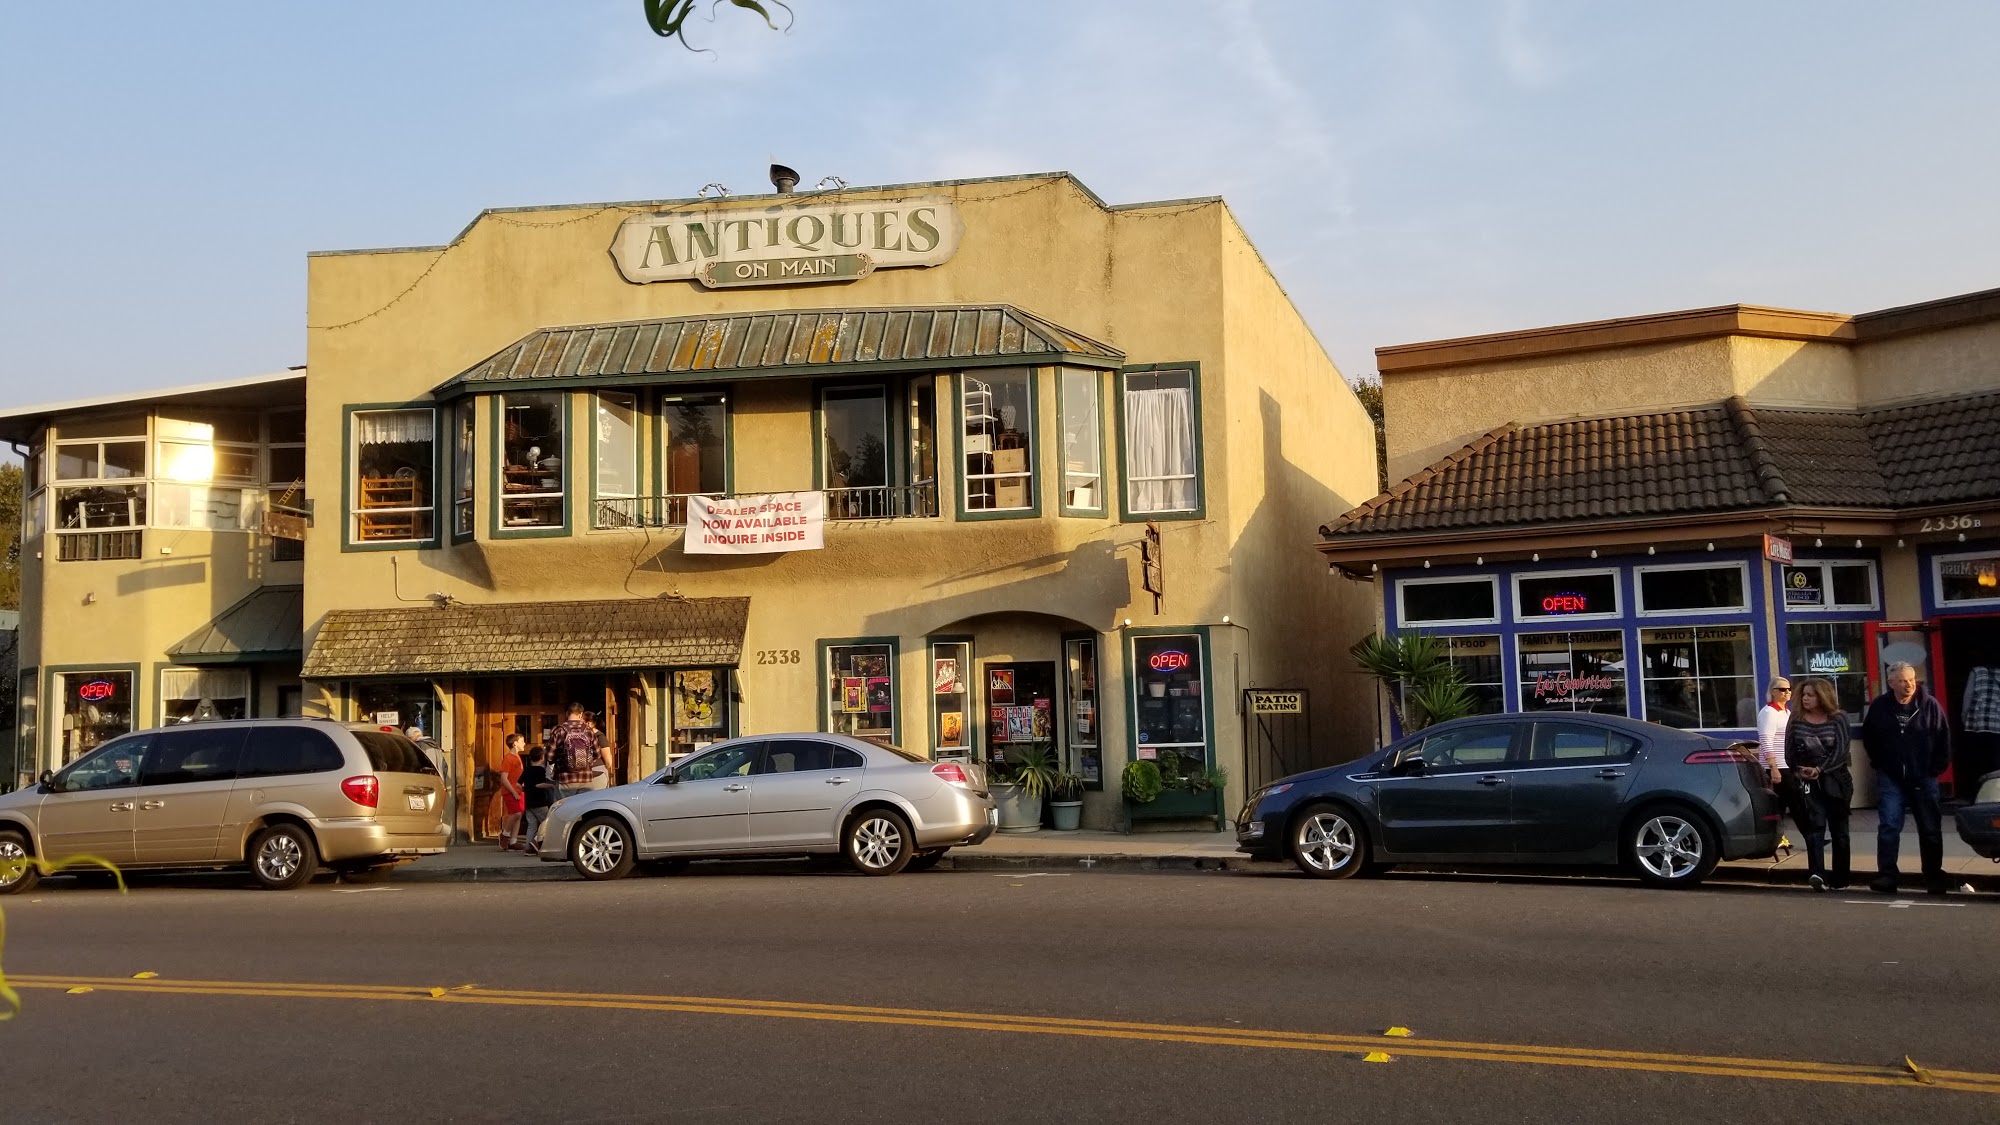 Antiques On Main